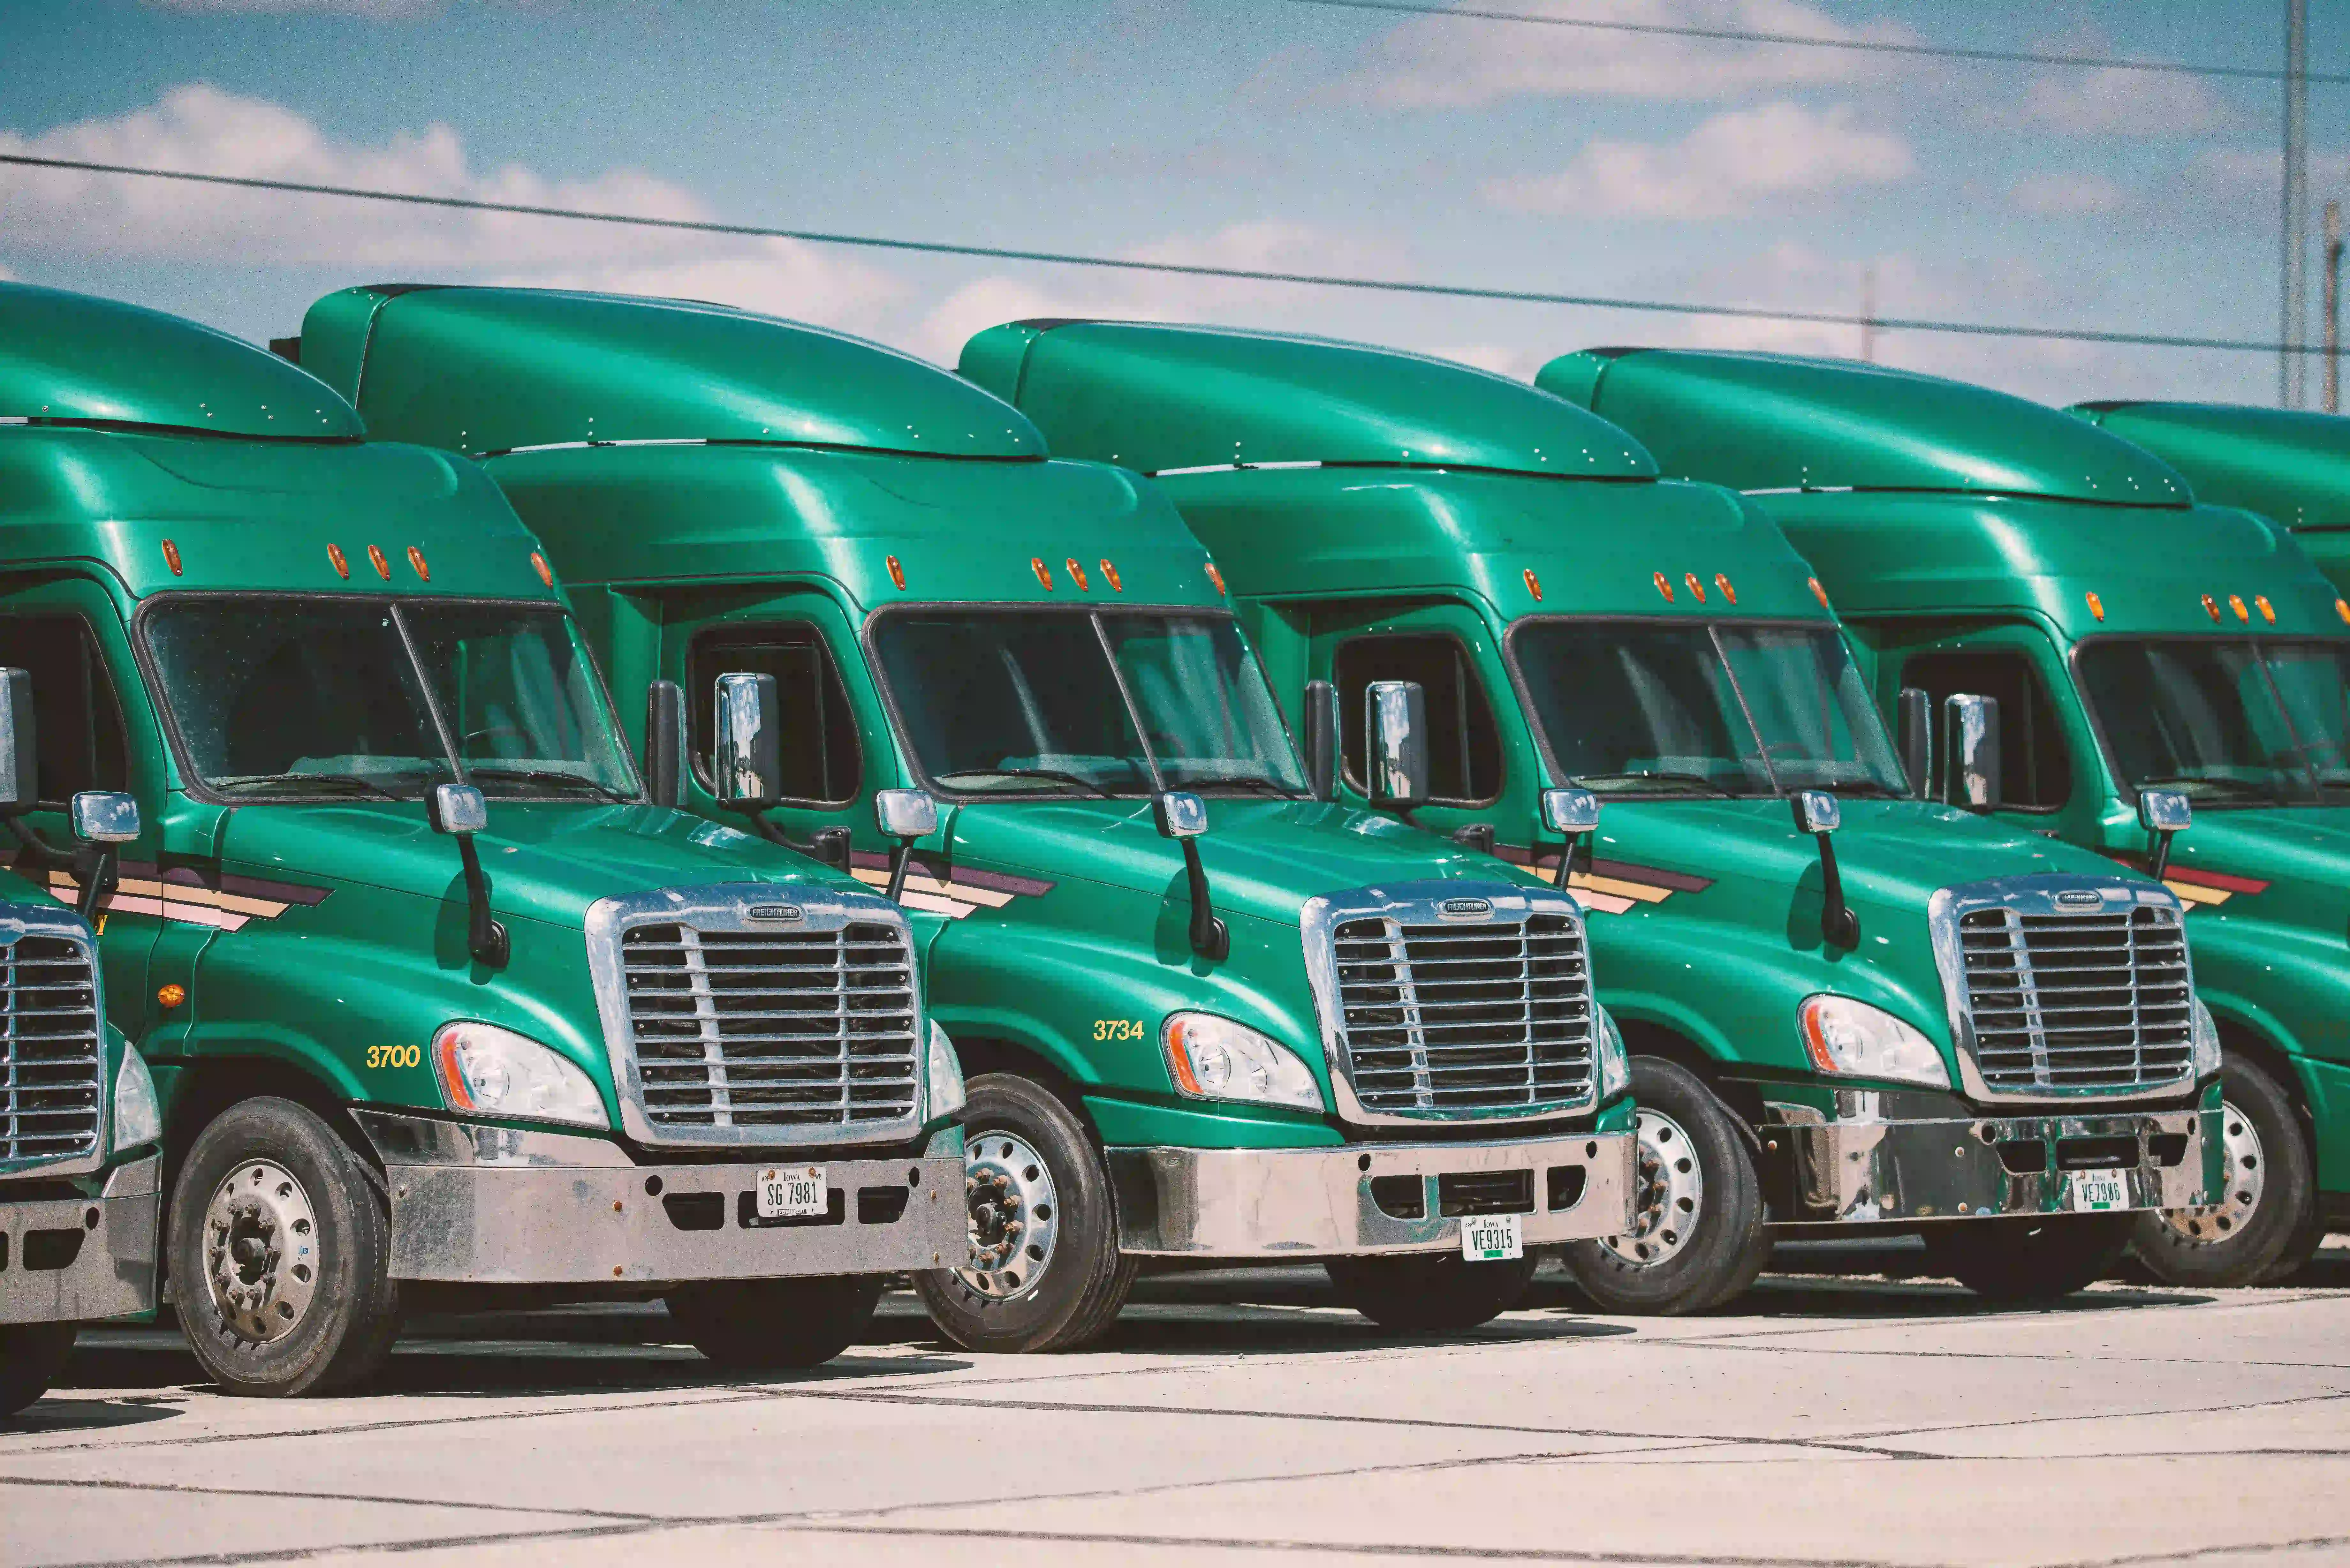 multiple green trucks parked next to eachtoher facing front at an angle